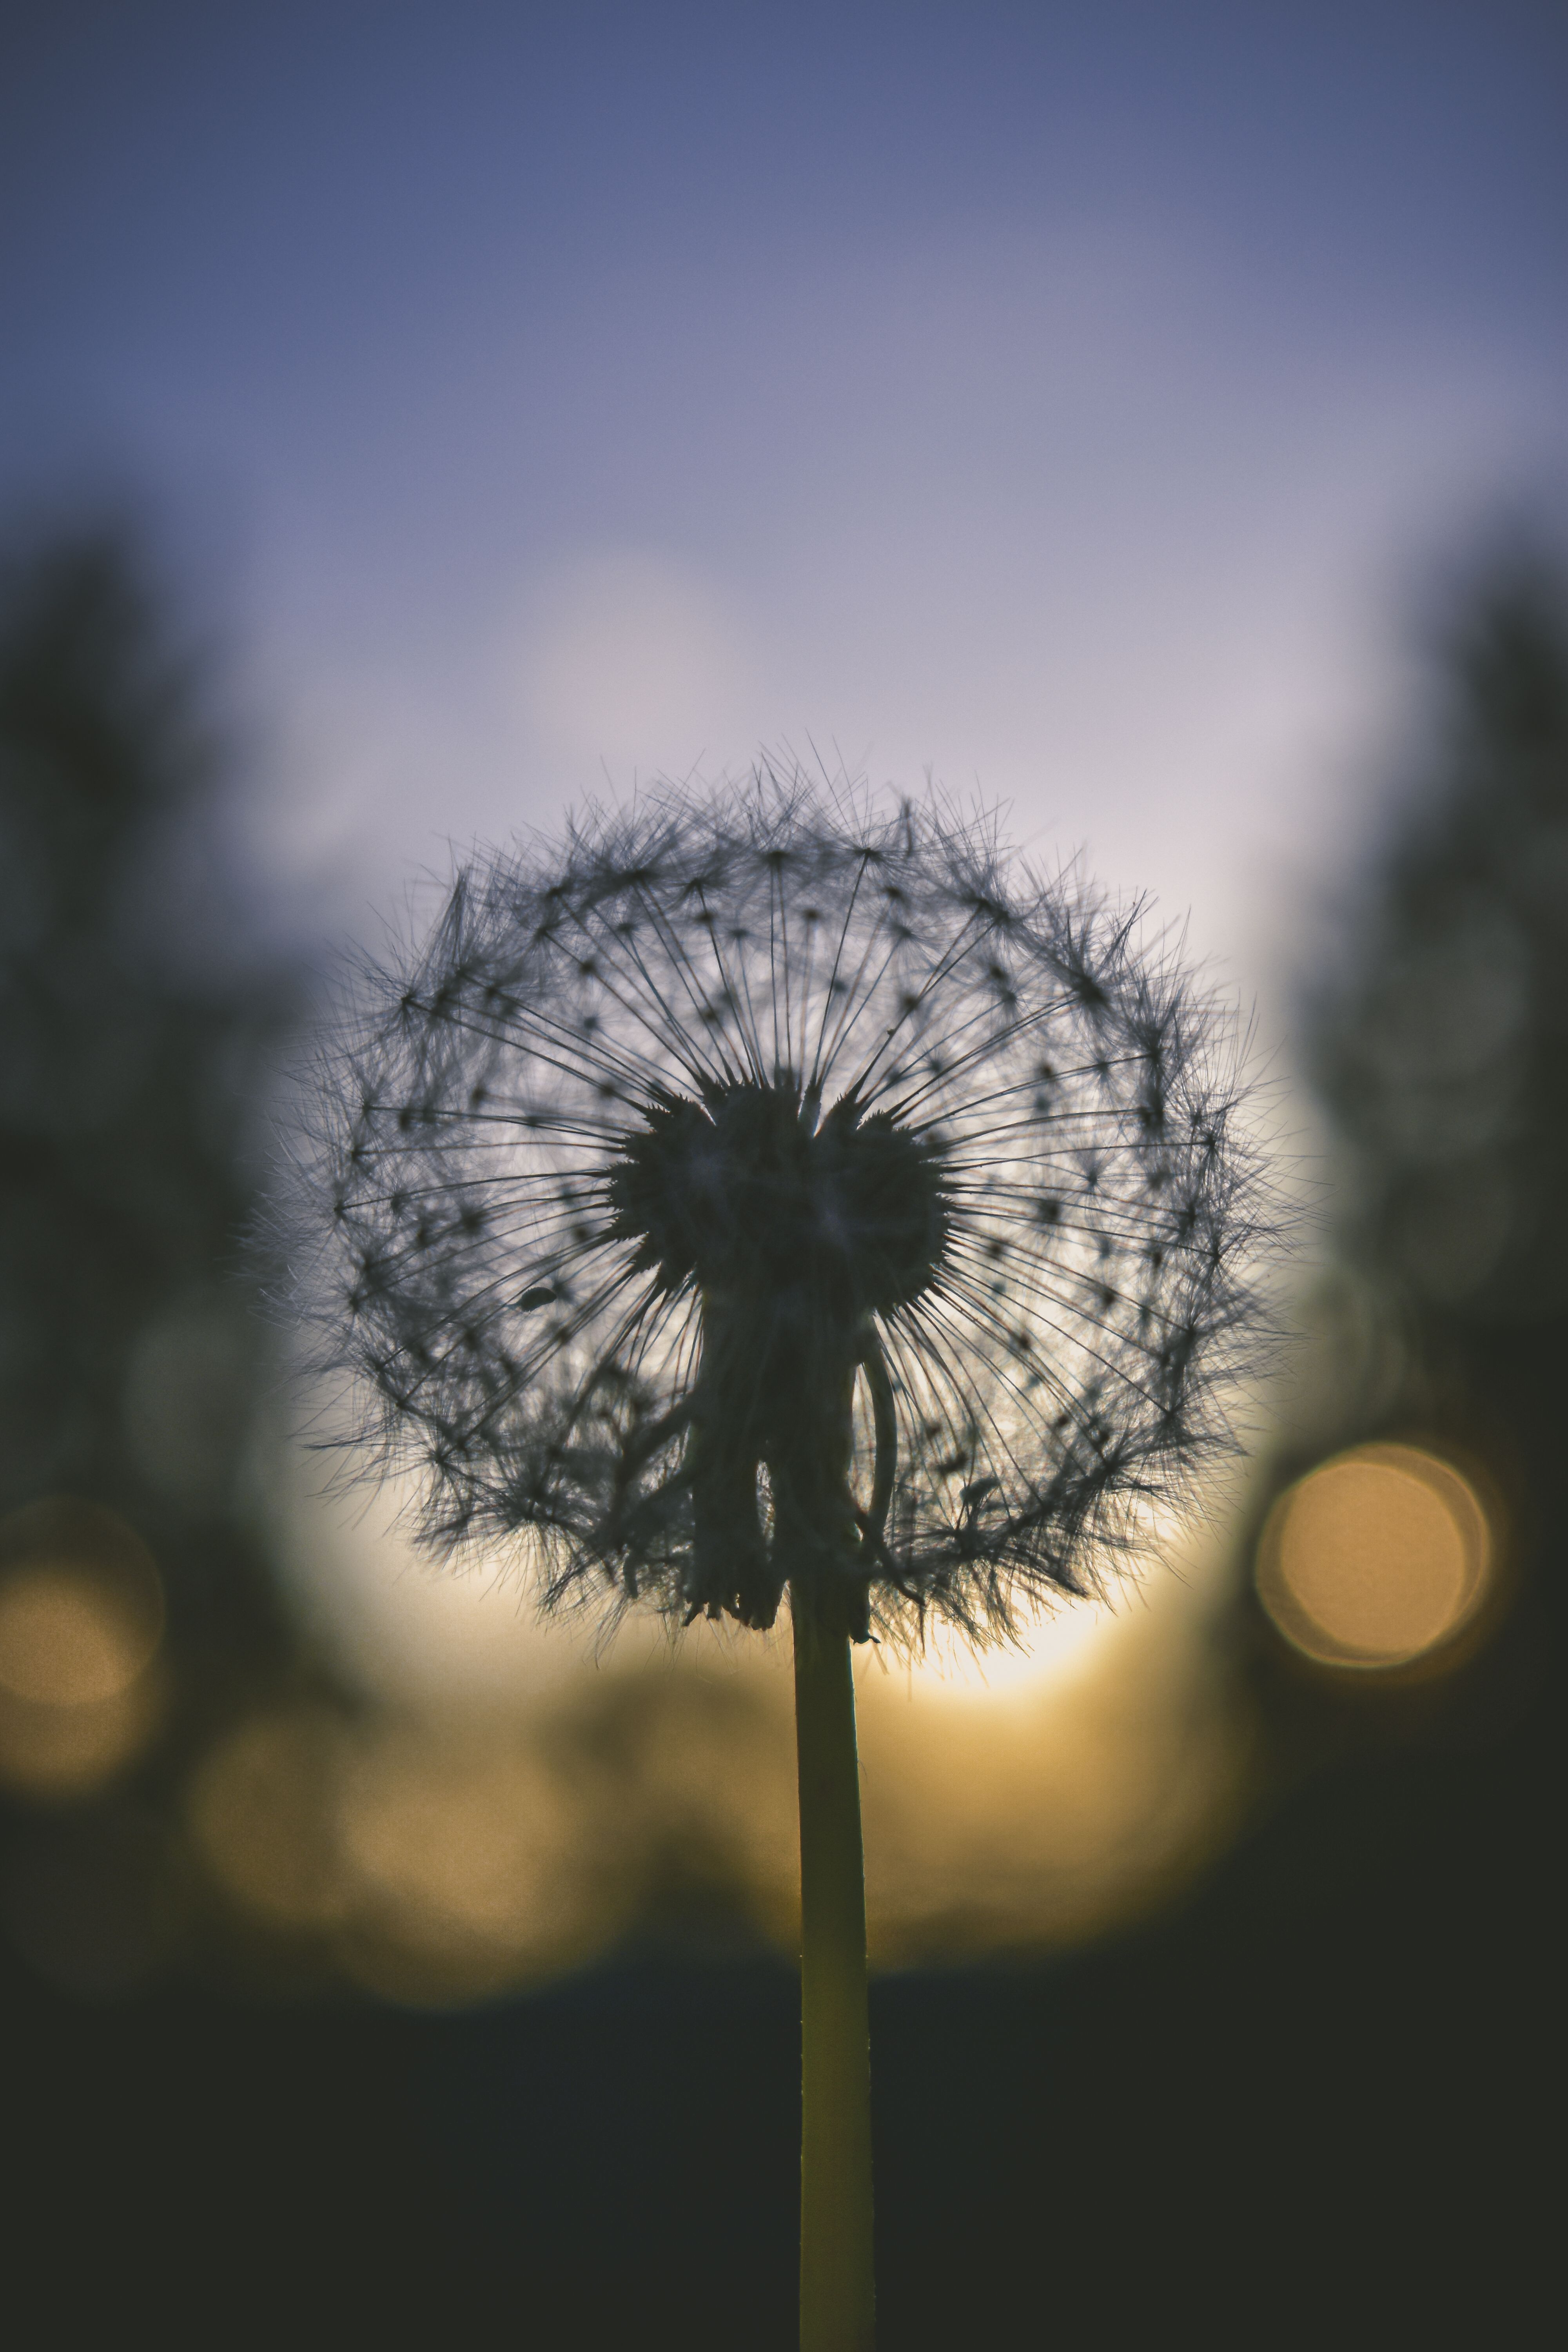 A silhouette of a dandelion in front of a sunset. - Dandelions